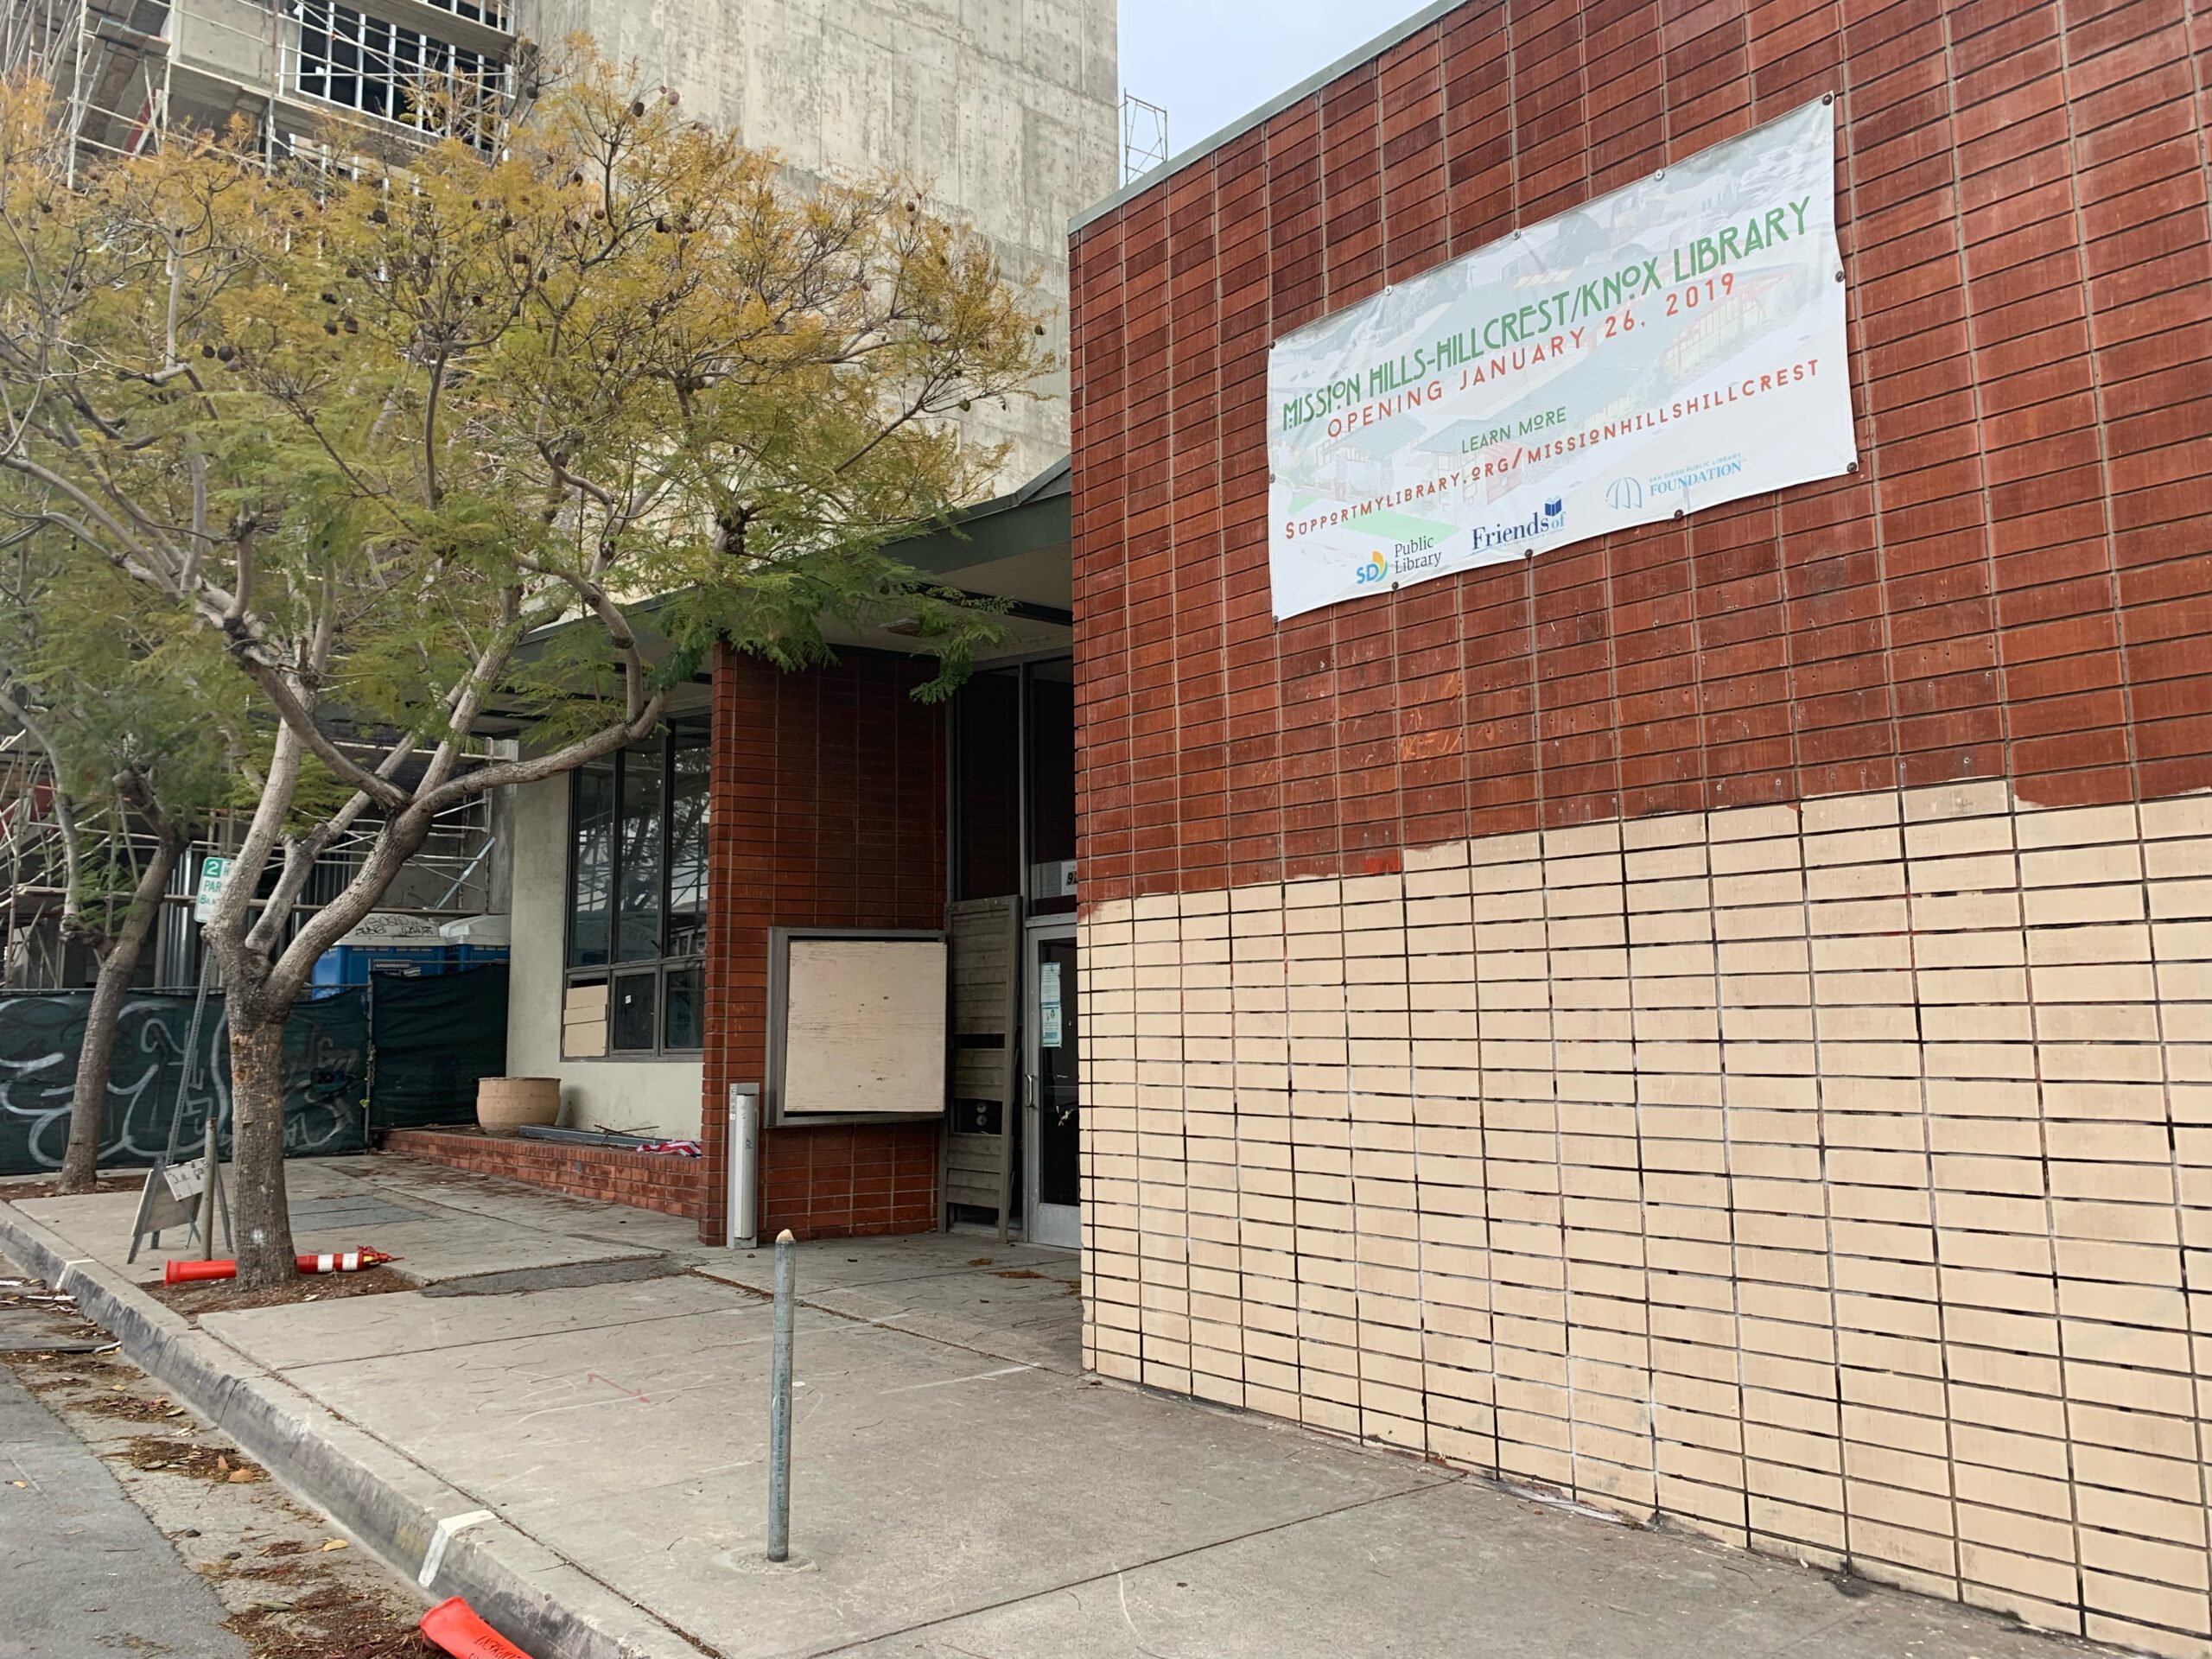 Dilatory City Makes Fate of Old Mission Hills Library Uncertain, Appeal Pending